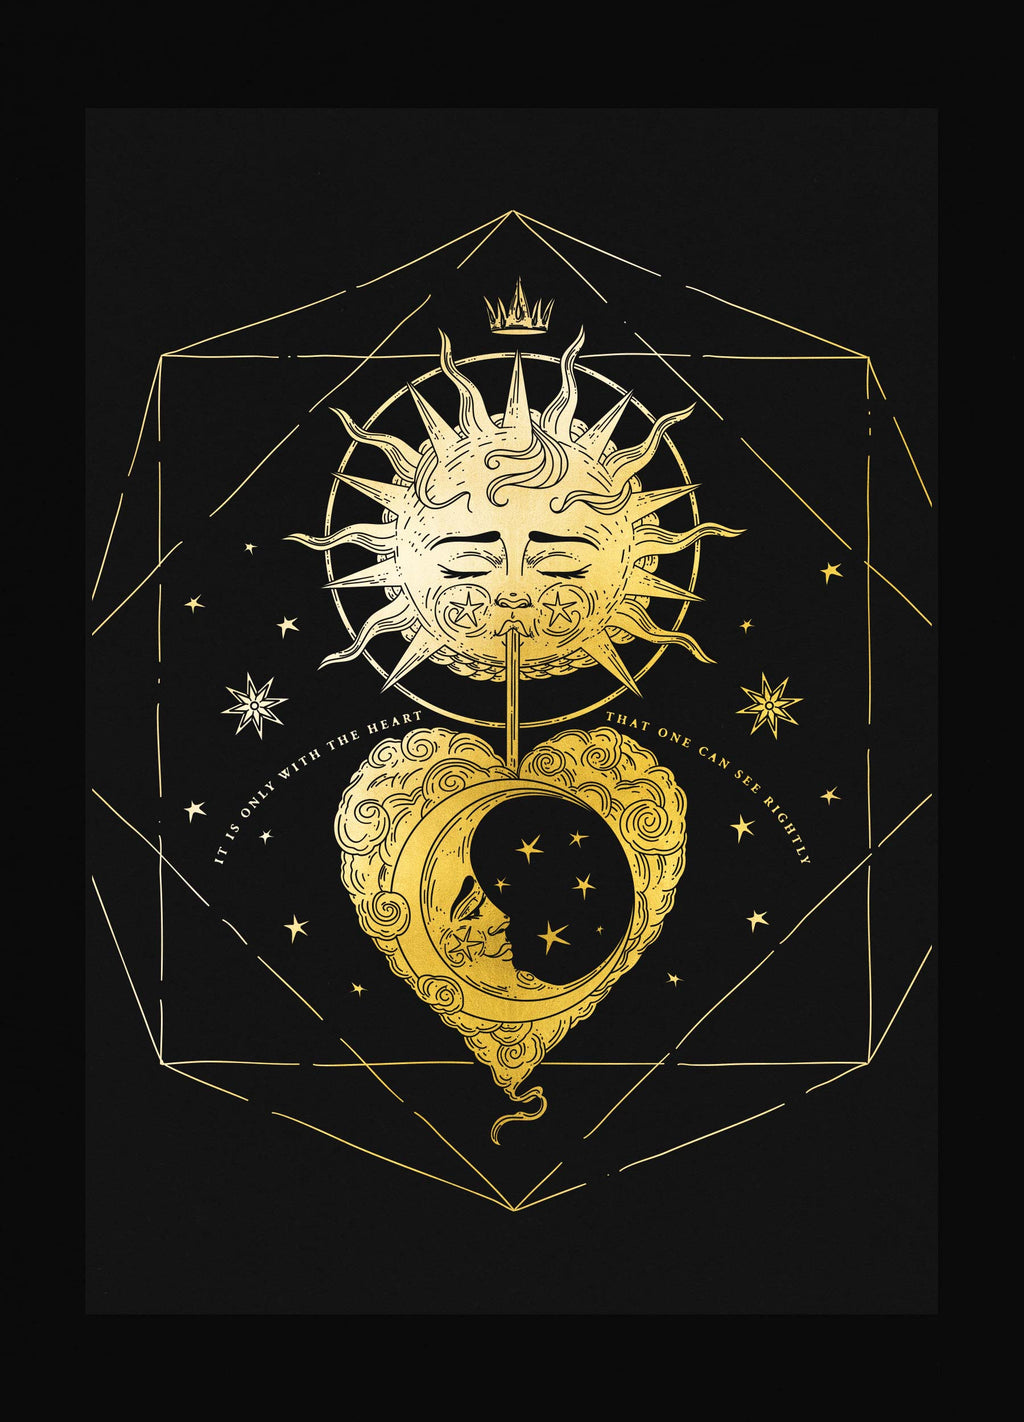 See with the heart sun blows kiss to the moon gold foil art print on black paper by Cocorrina & Co